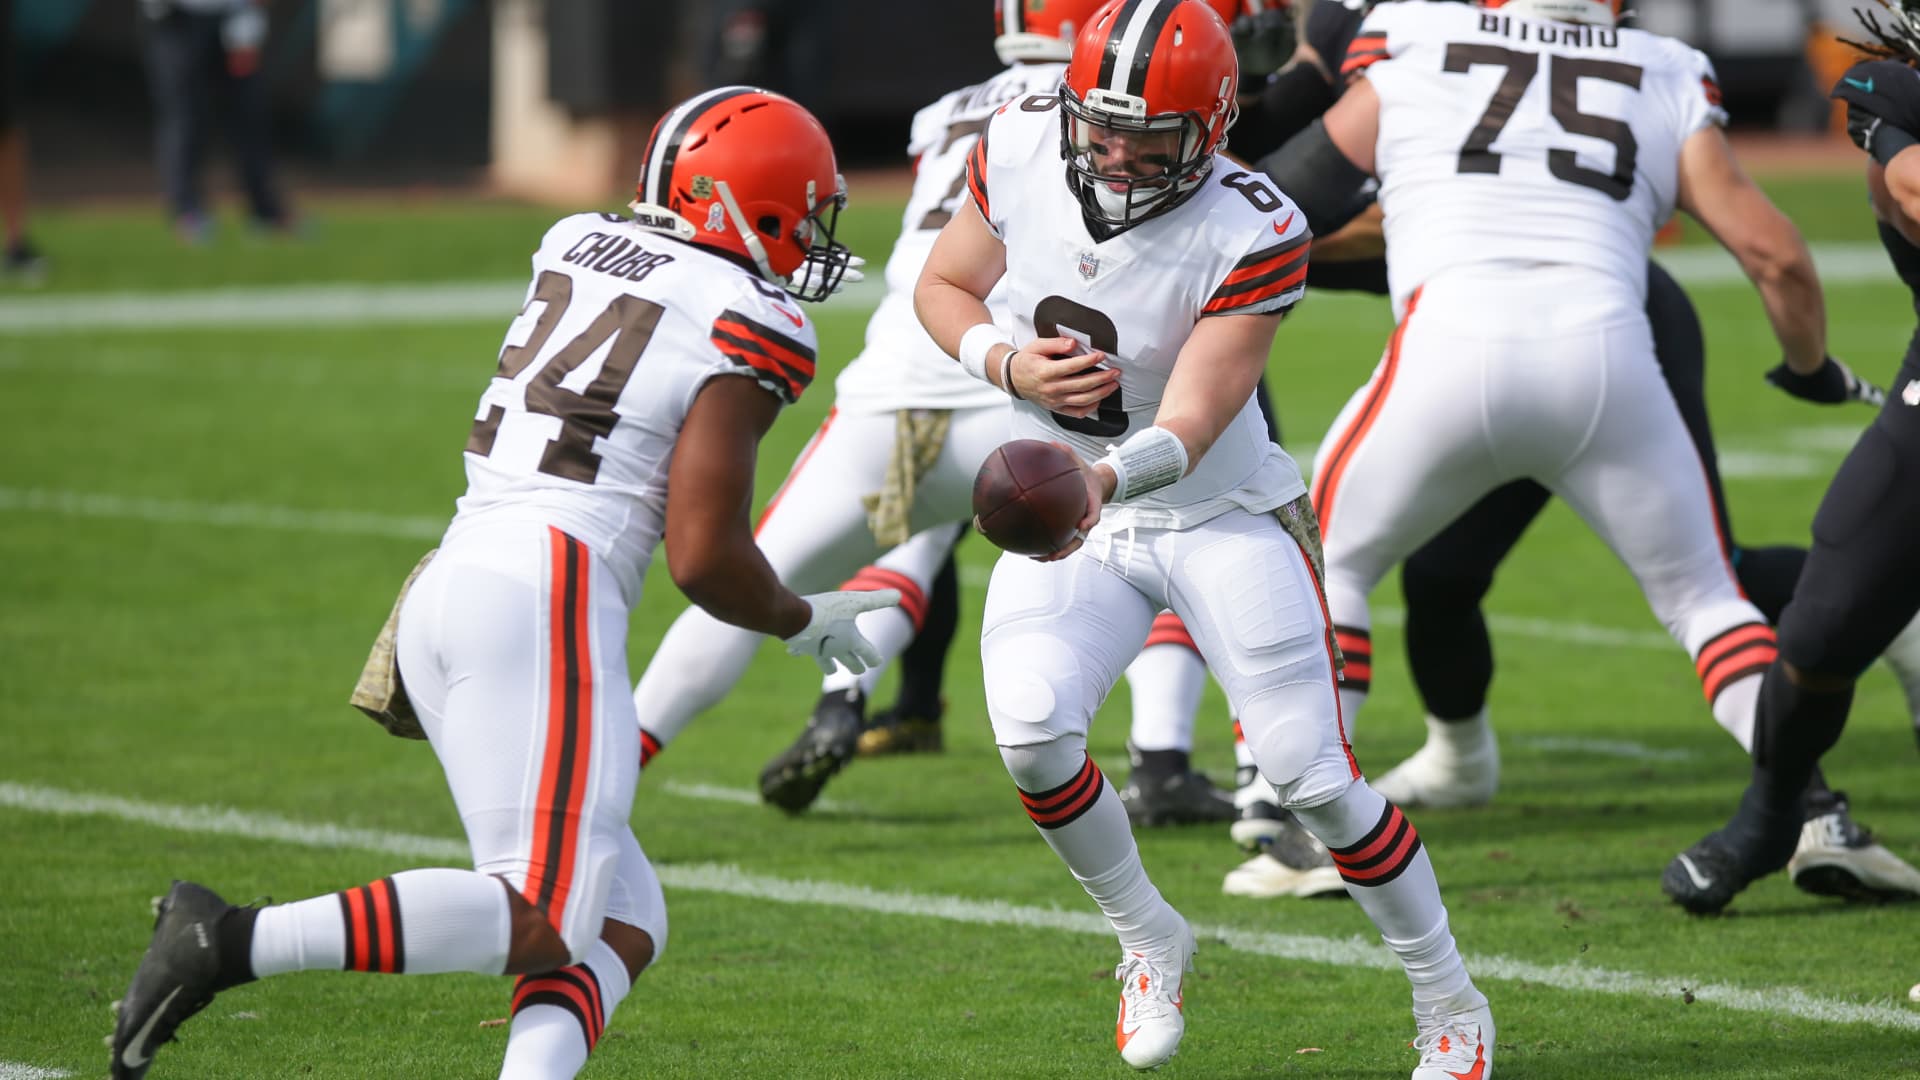 Cleveland Browns Quarterback Baker Mayfield (6) hands off to Cleveland Browns Running Back Nick Chubb (24) during the game between the Cleveland Browns and the Jacksonville Jaguars on November 29, 2020 at TIAA Bank Field in Jacksonville, Fl.